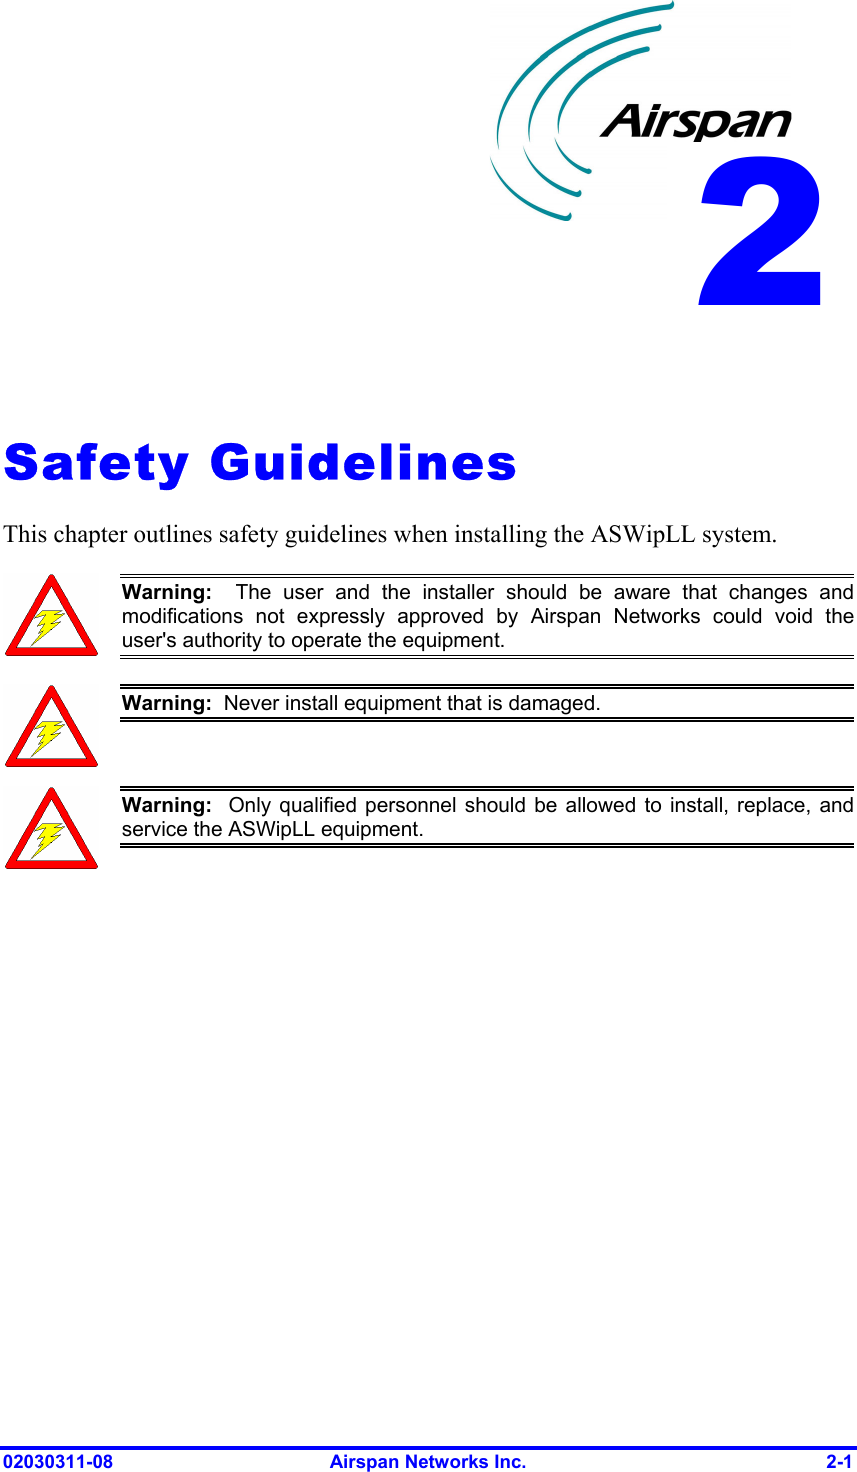  02030311-08  Airspan Networks Inc.  2-1   Safety Guidelines This chapter outlines safety guidelines when installing the ASWipLL system.  Warning:  The user and the installer should be aware that changes andmodifications not expressly approved by Airspan Networks could void theuser&apos;s authority to operate the equipment.  Warning:  Never install equipment that is damaged.  Warning:  Only qualified personnel should be allowed to install, replace, andservice the ASWipLL equipment.  2 